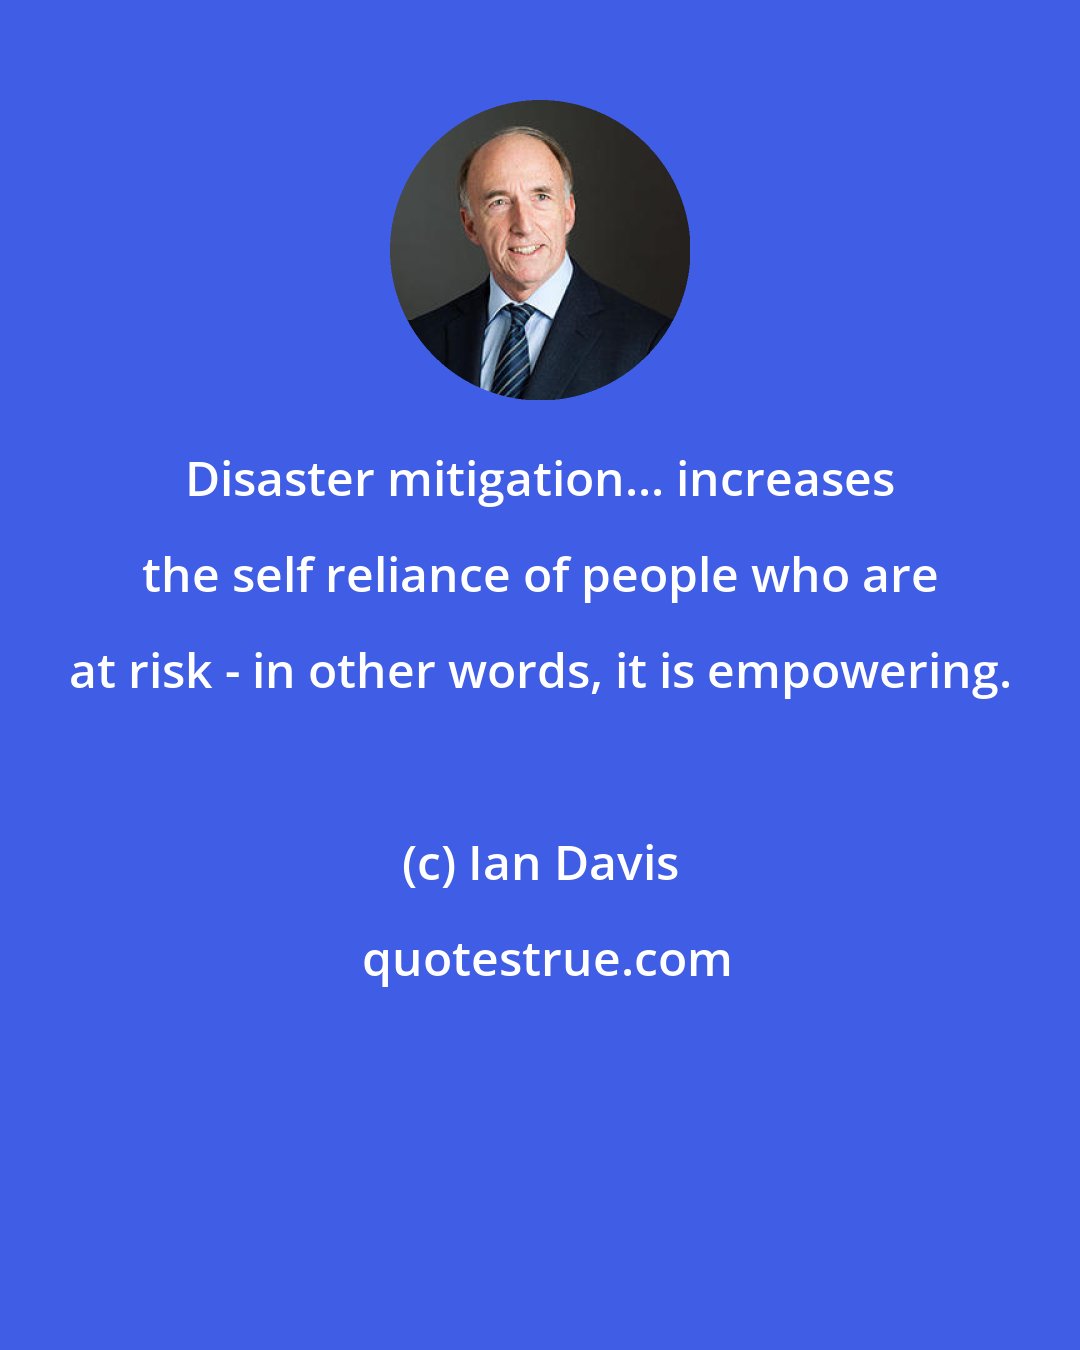 Ian Davis: Disaster mitigation... increases the self reliance of people who are at risk - in other words, it is empowering.